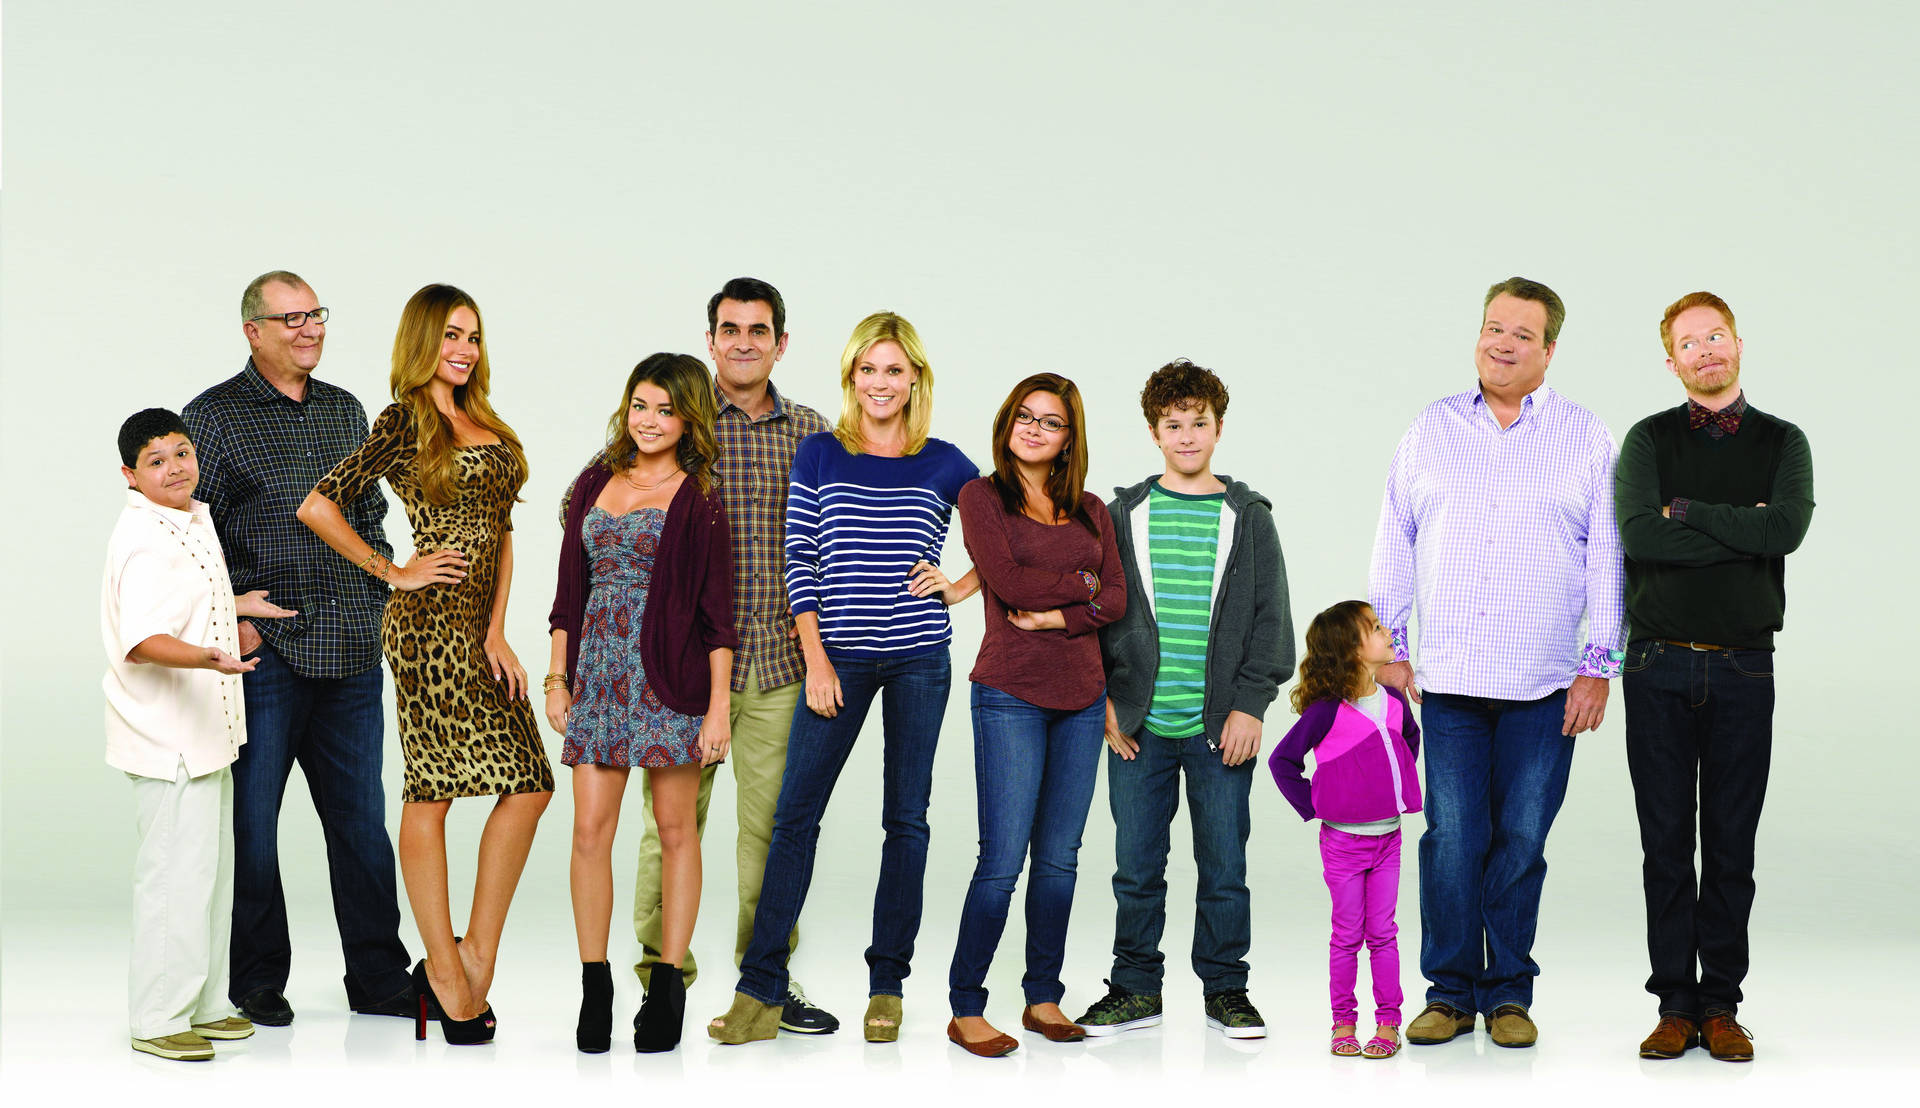 The Dunphy Family Brings Its Unique Brand Of Comedy To Abc's Hit Show, Modern Family. Background